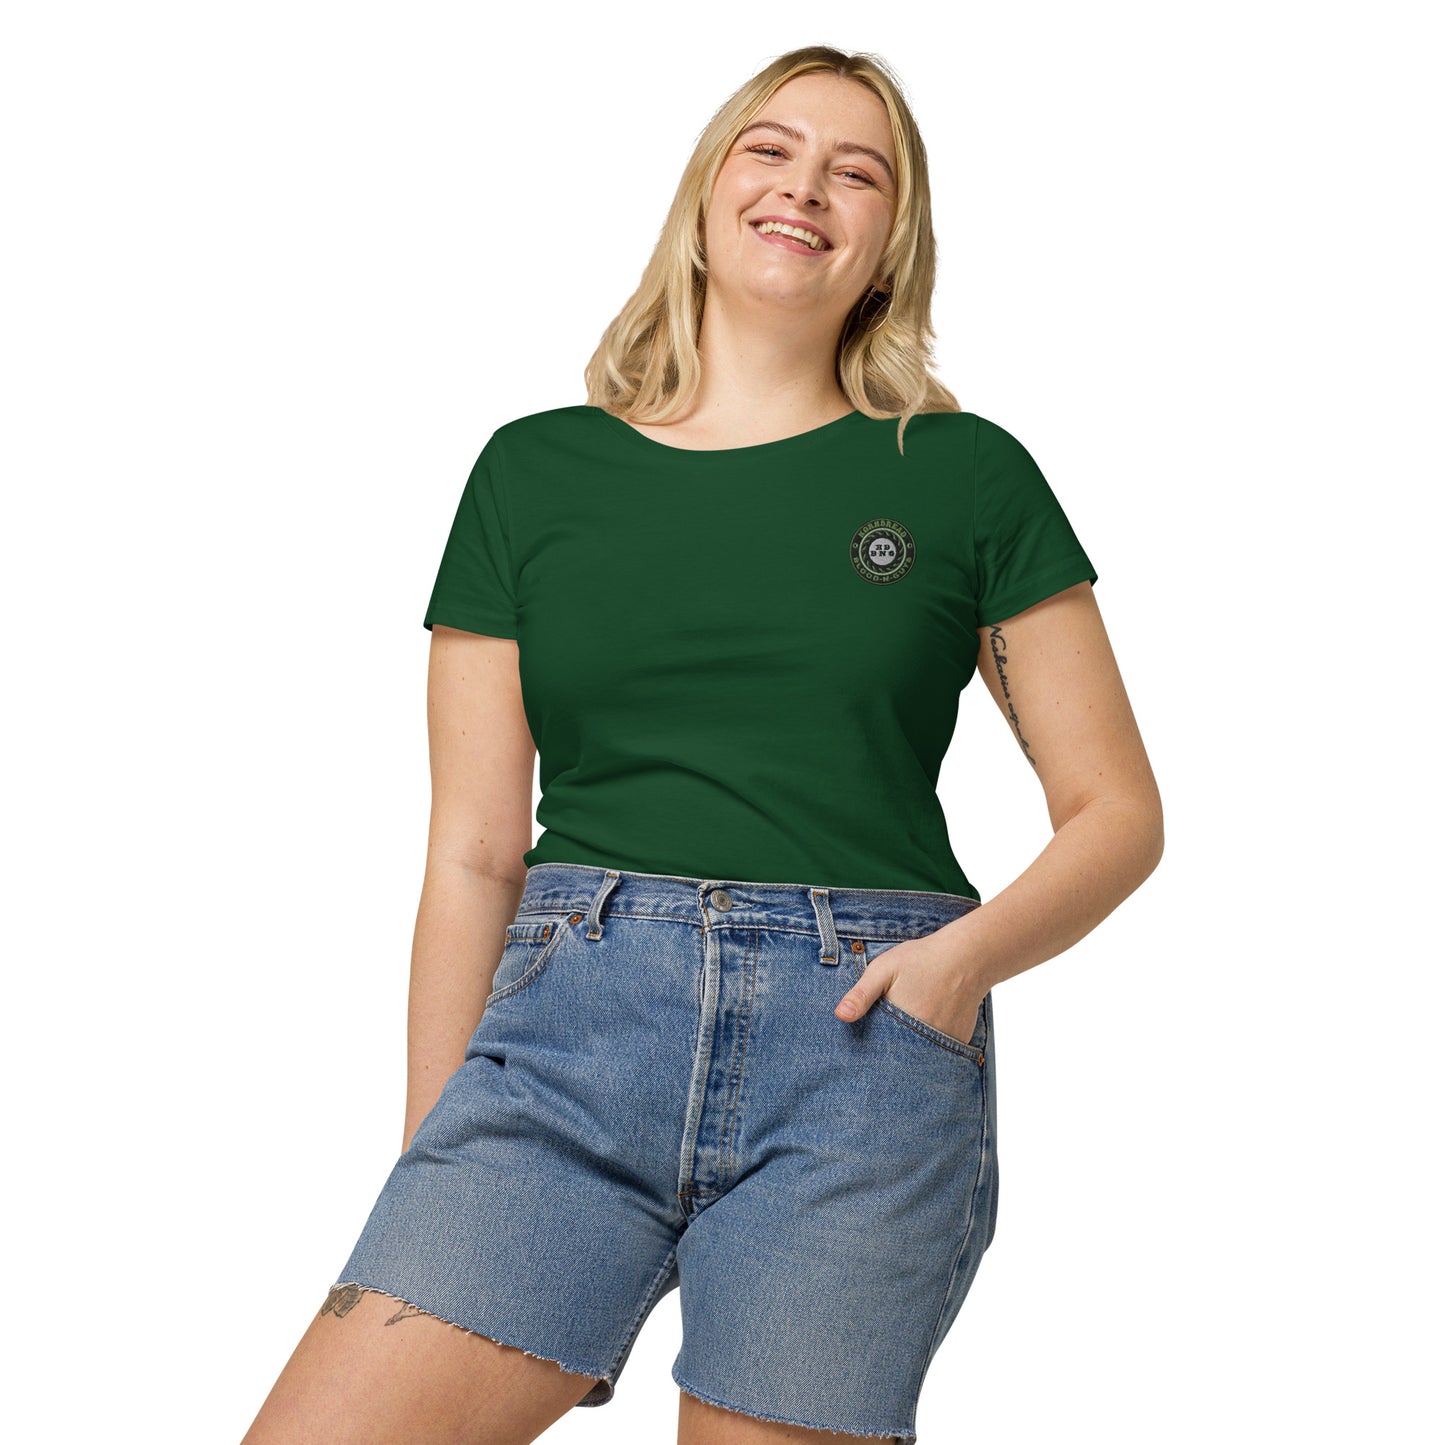 KBBNG Embroidered Badge+ Women’s Organic T-Shirt